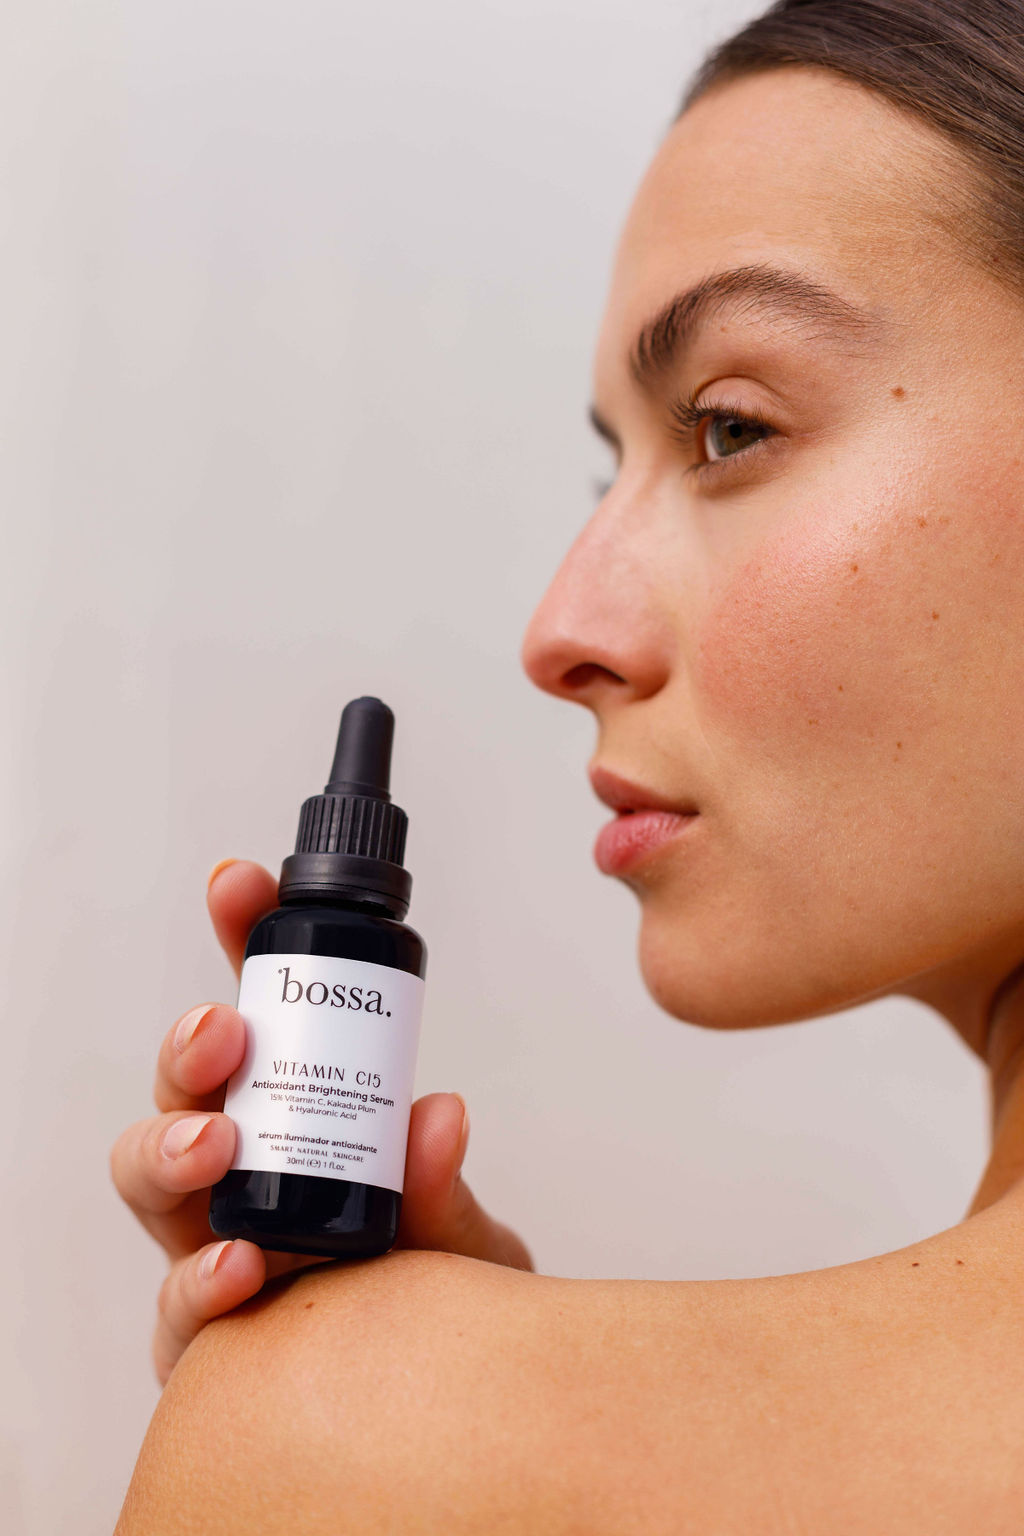 What does a Vitamin C serum do for your skin?